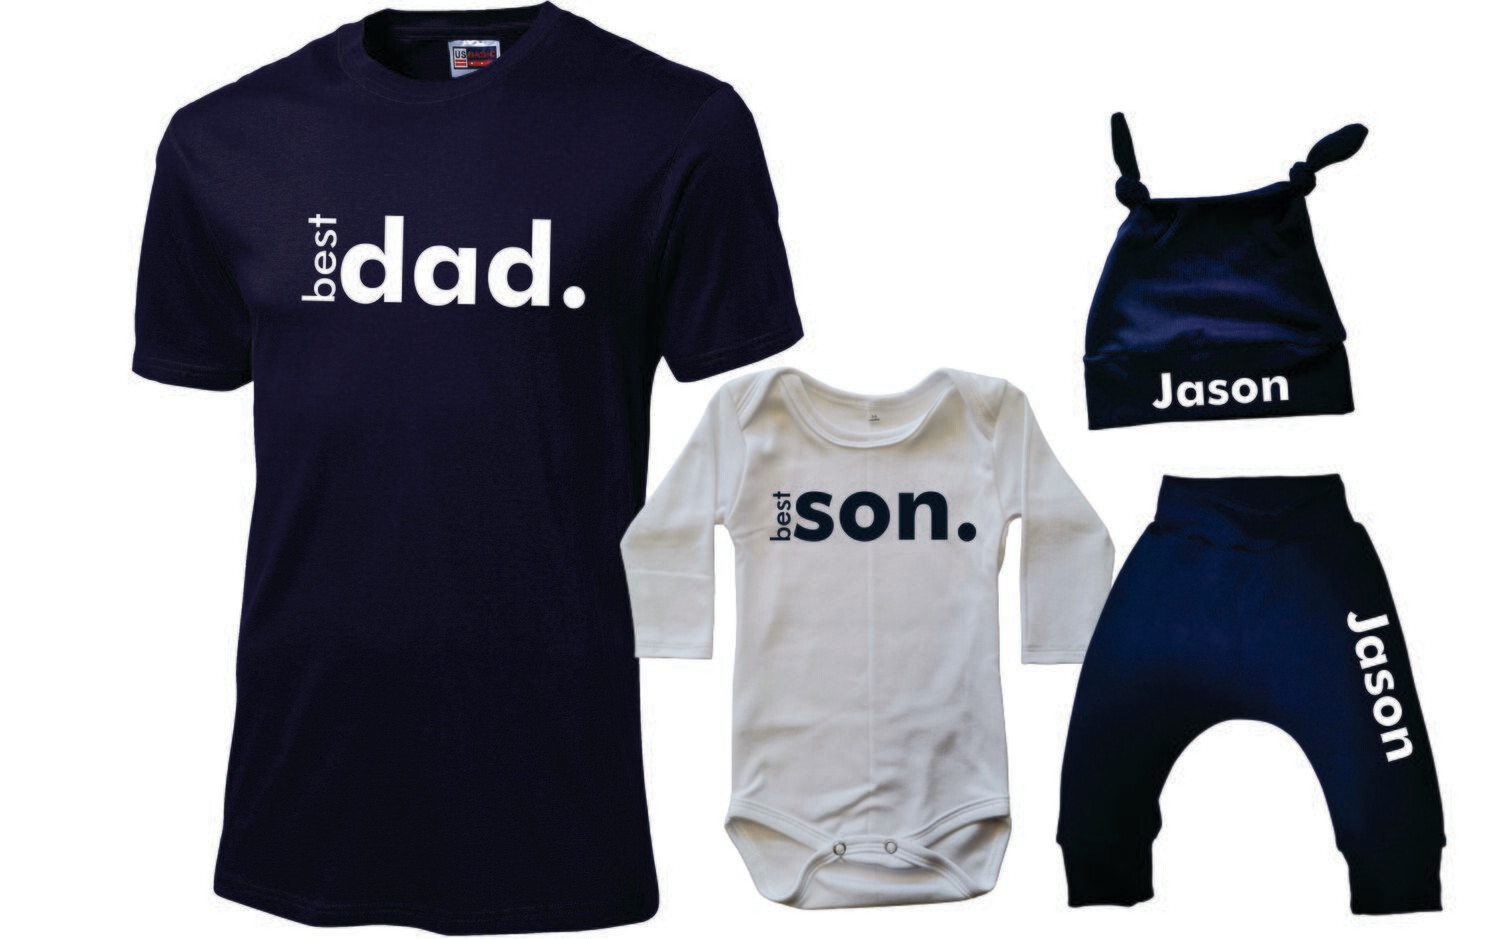 Daddy Short Sleeve Shirt and Baby Set